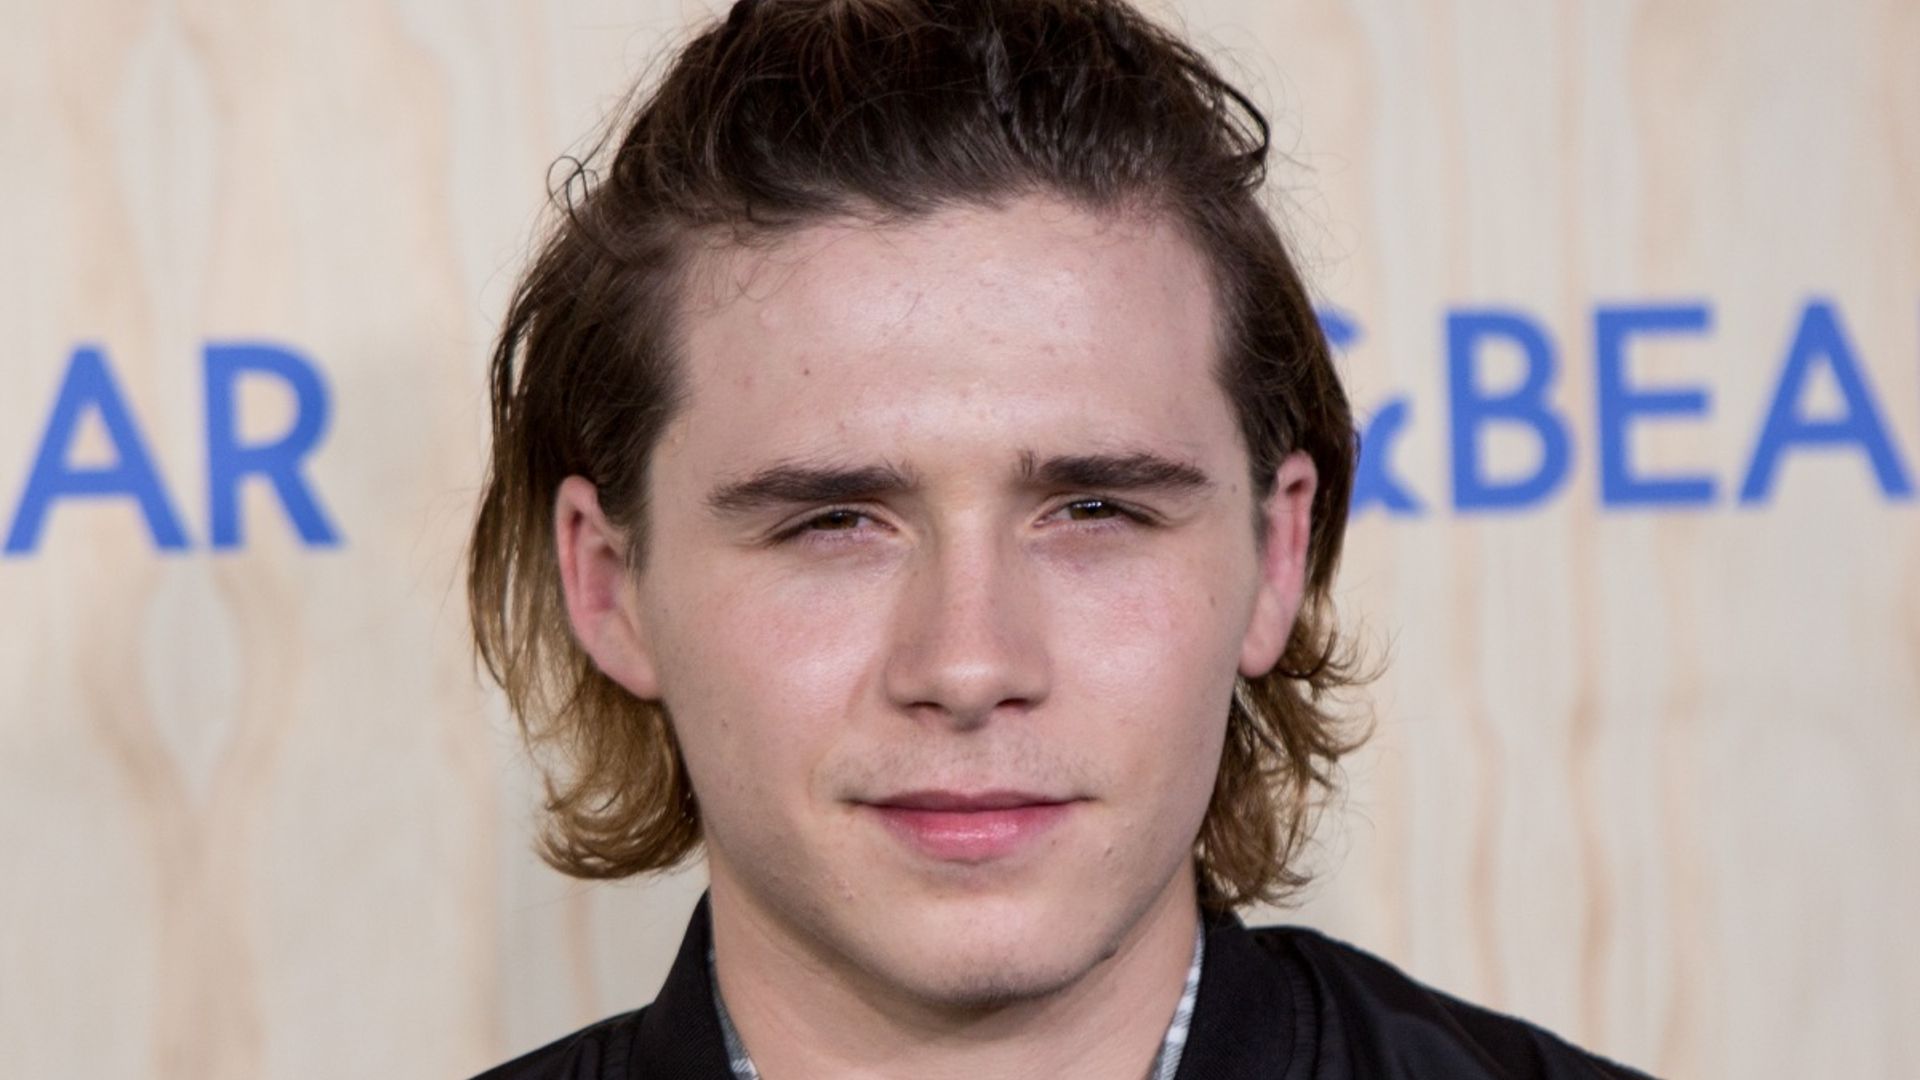 Brooklyn Beckham shares touching engagement story as he joins Hoda Kotb and Al Roker on Today Show